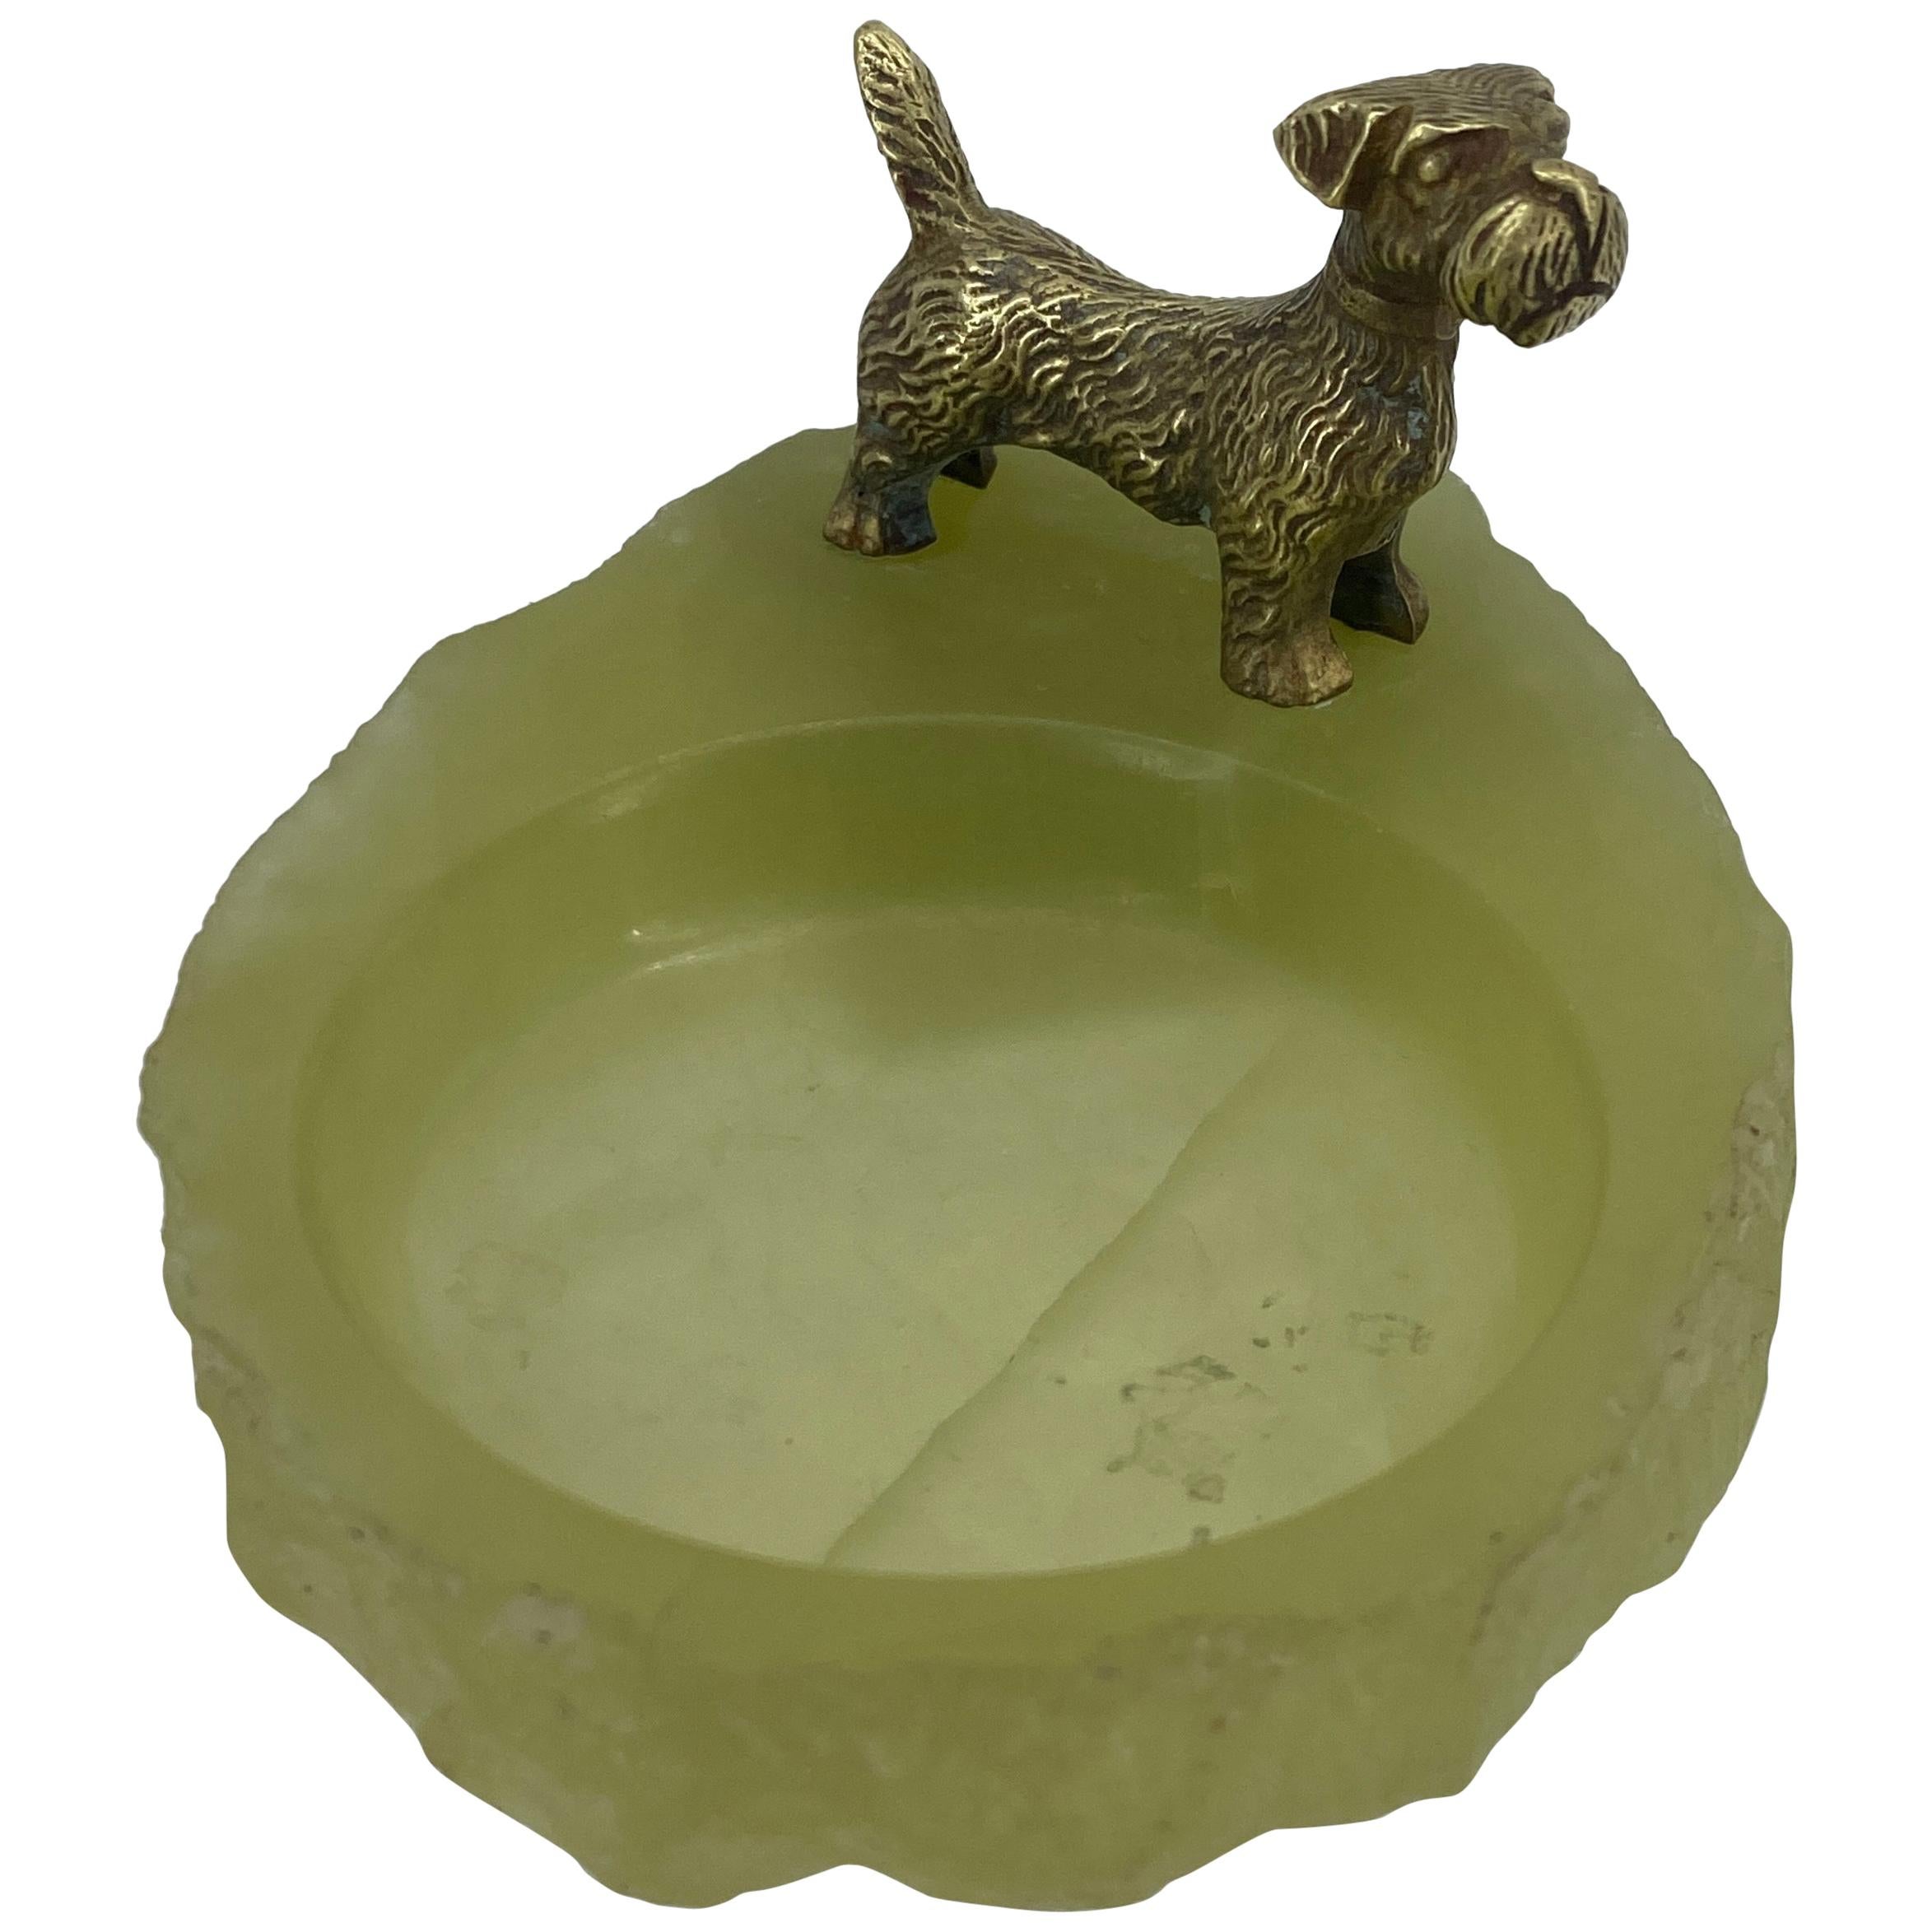 Pistachio Green Onyx and Bronze Terrier Ashtray or Jewelry Tray